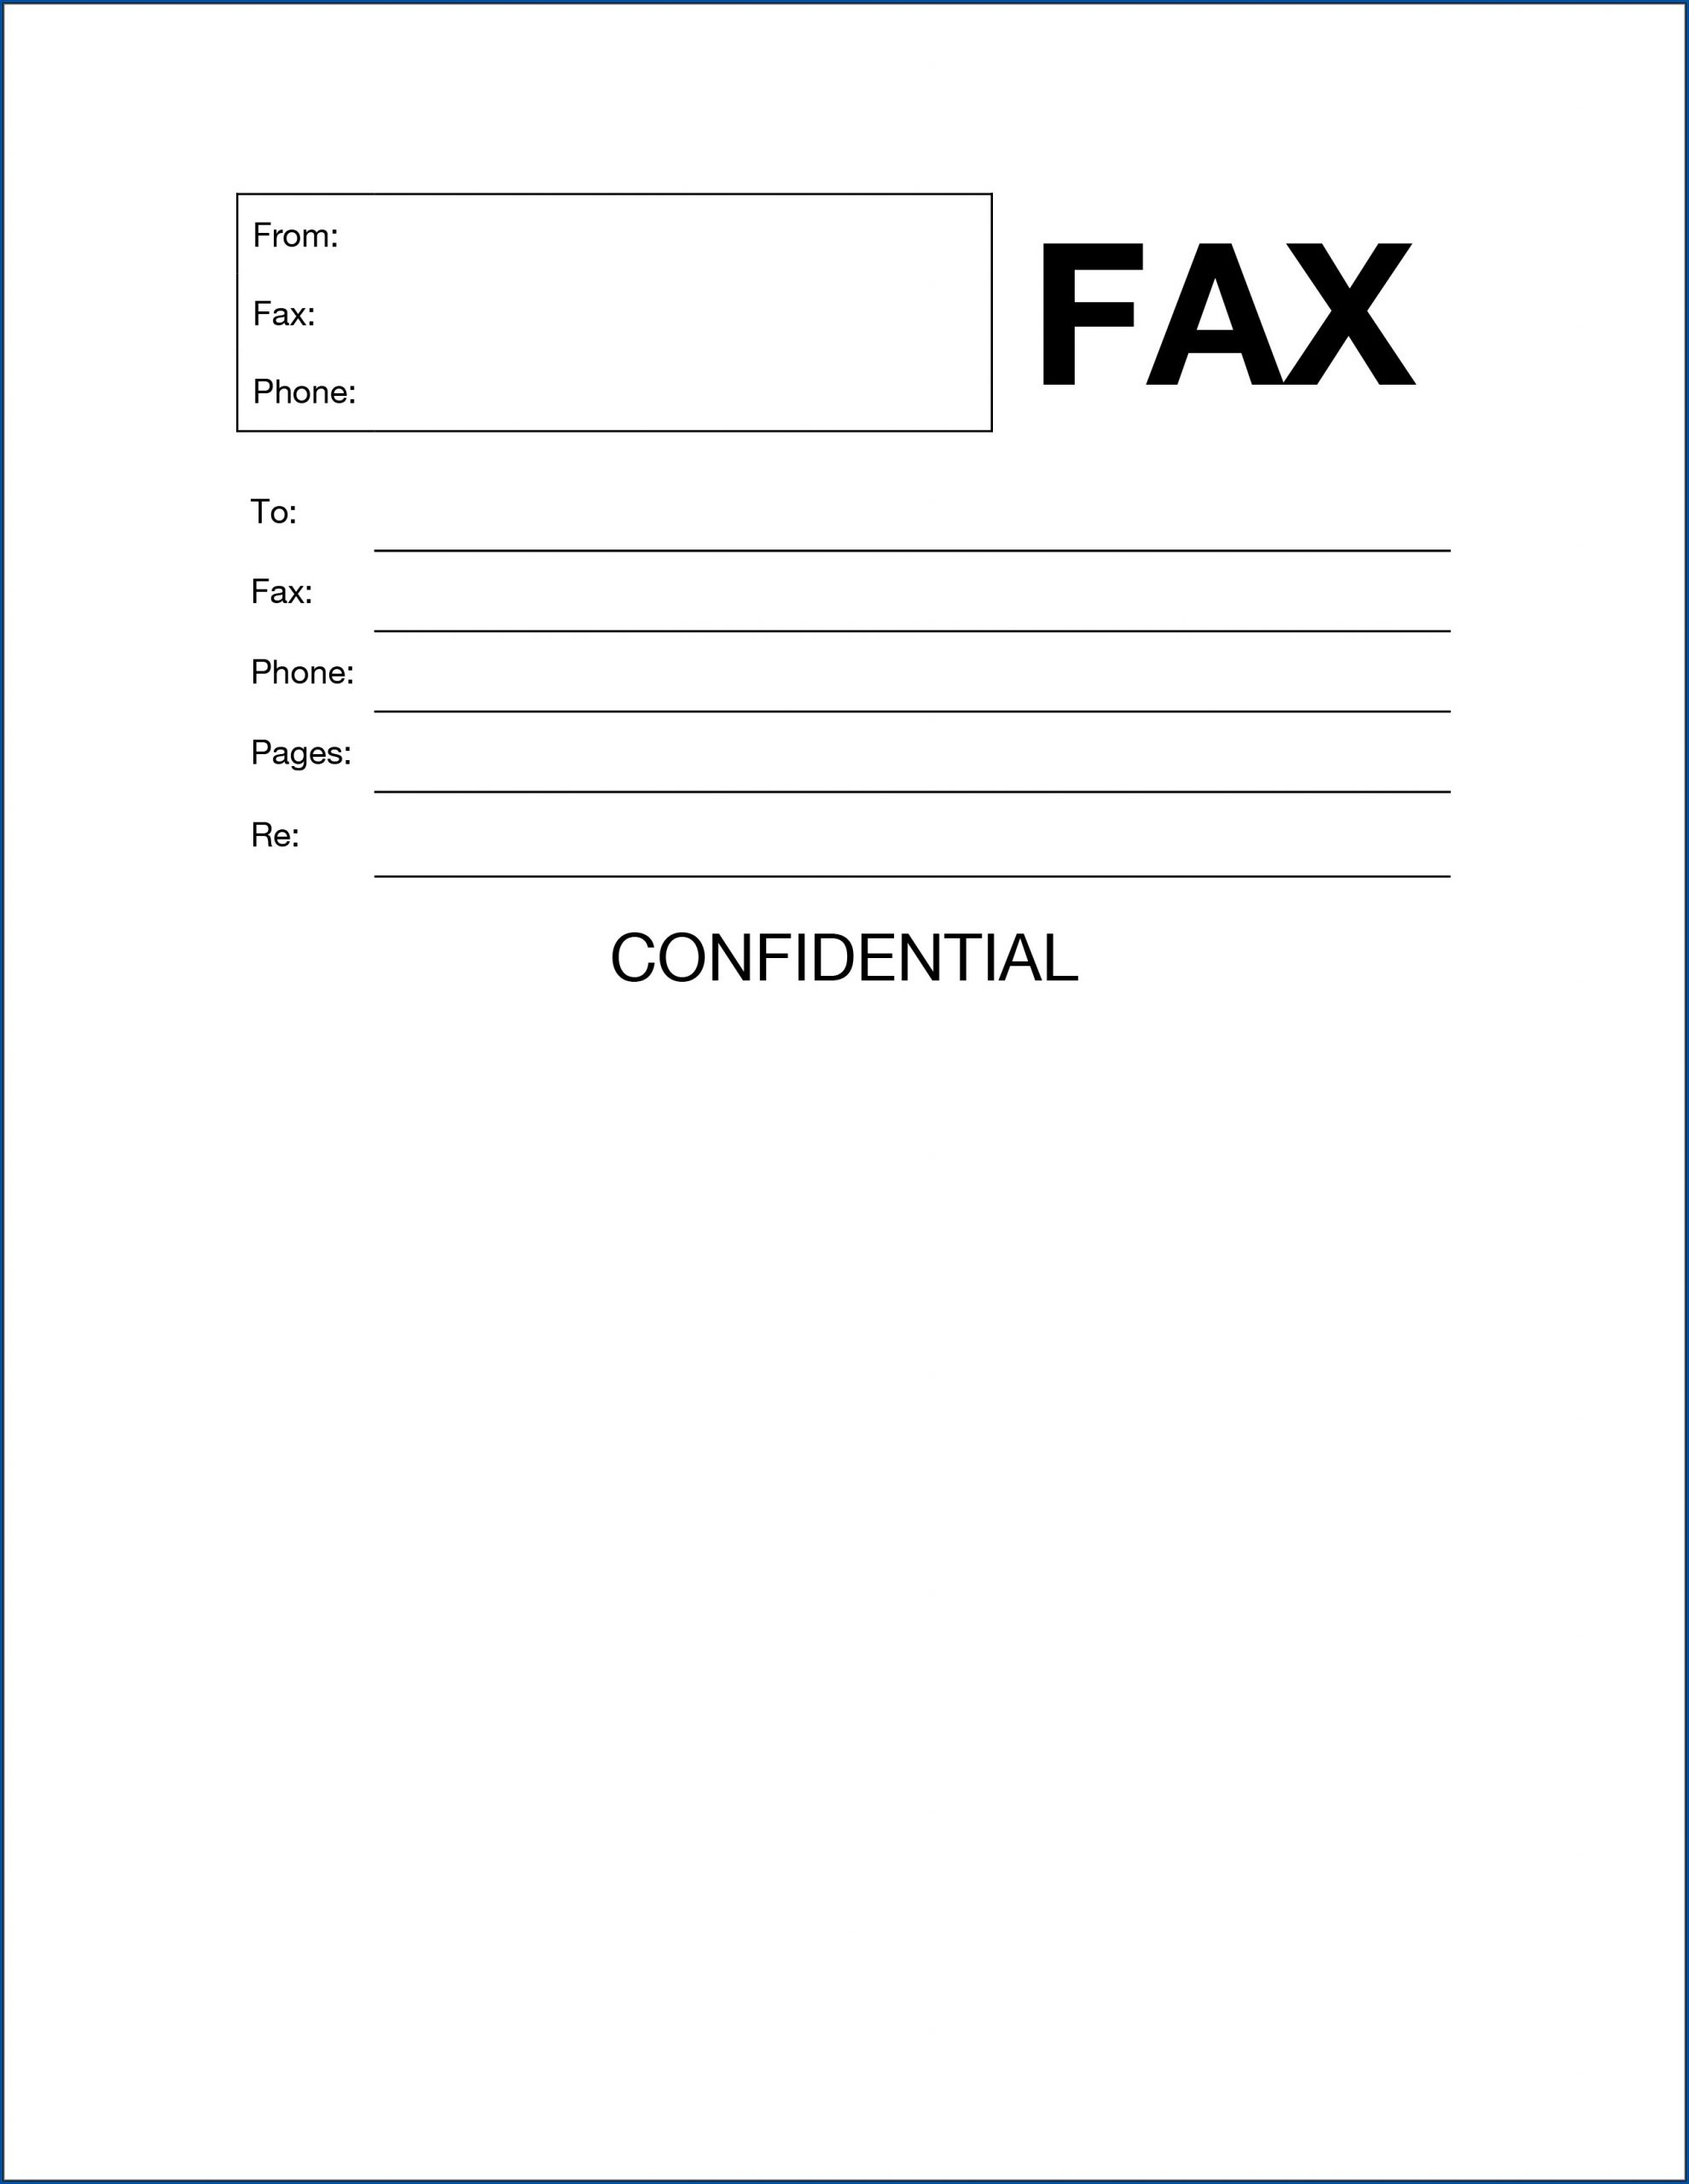 Fax Template Printable from www.templateral.com